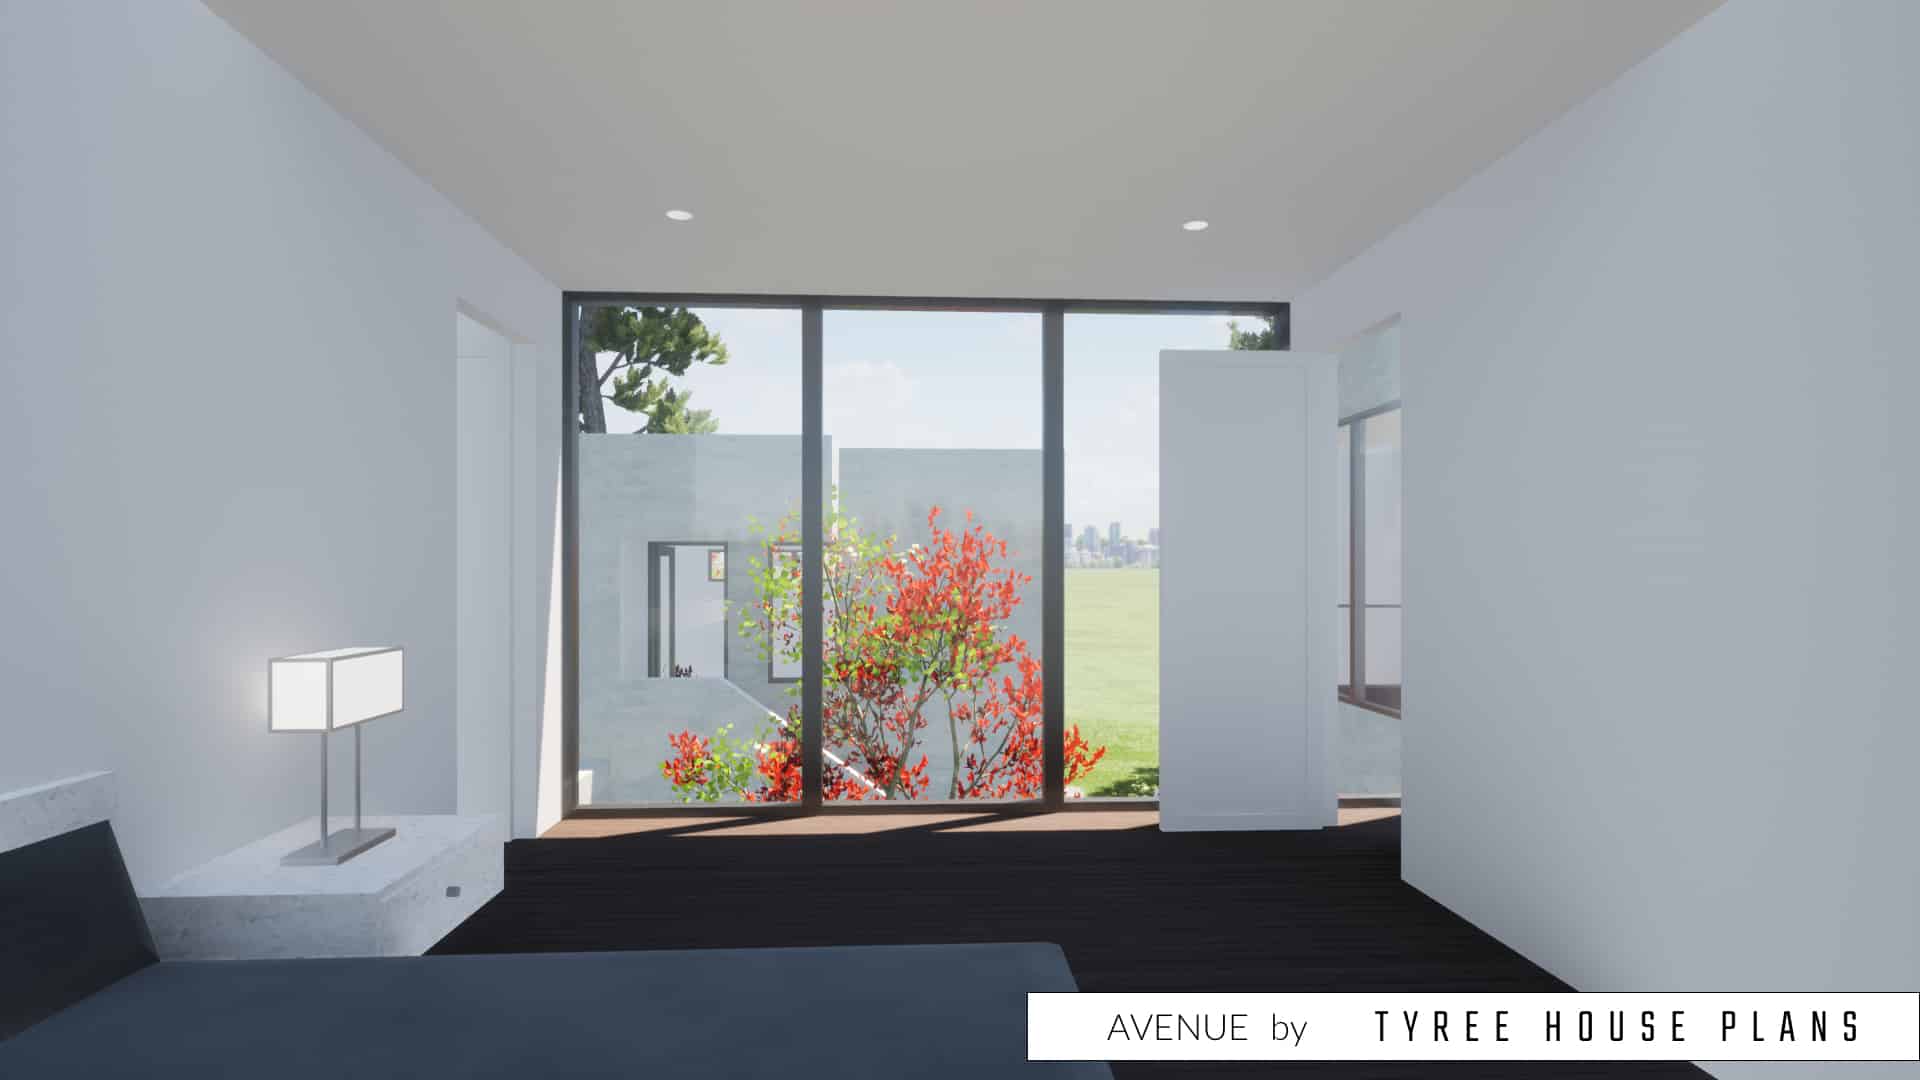 Avenue by Tyree House Plans.